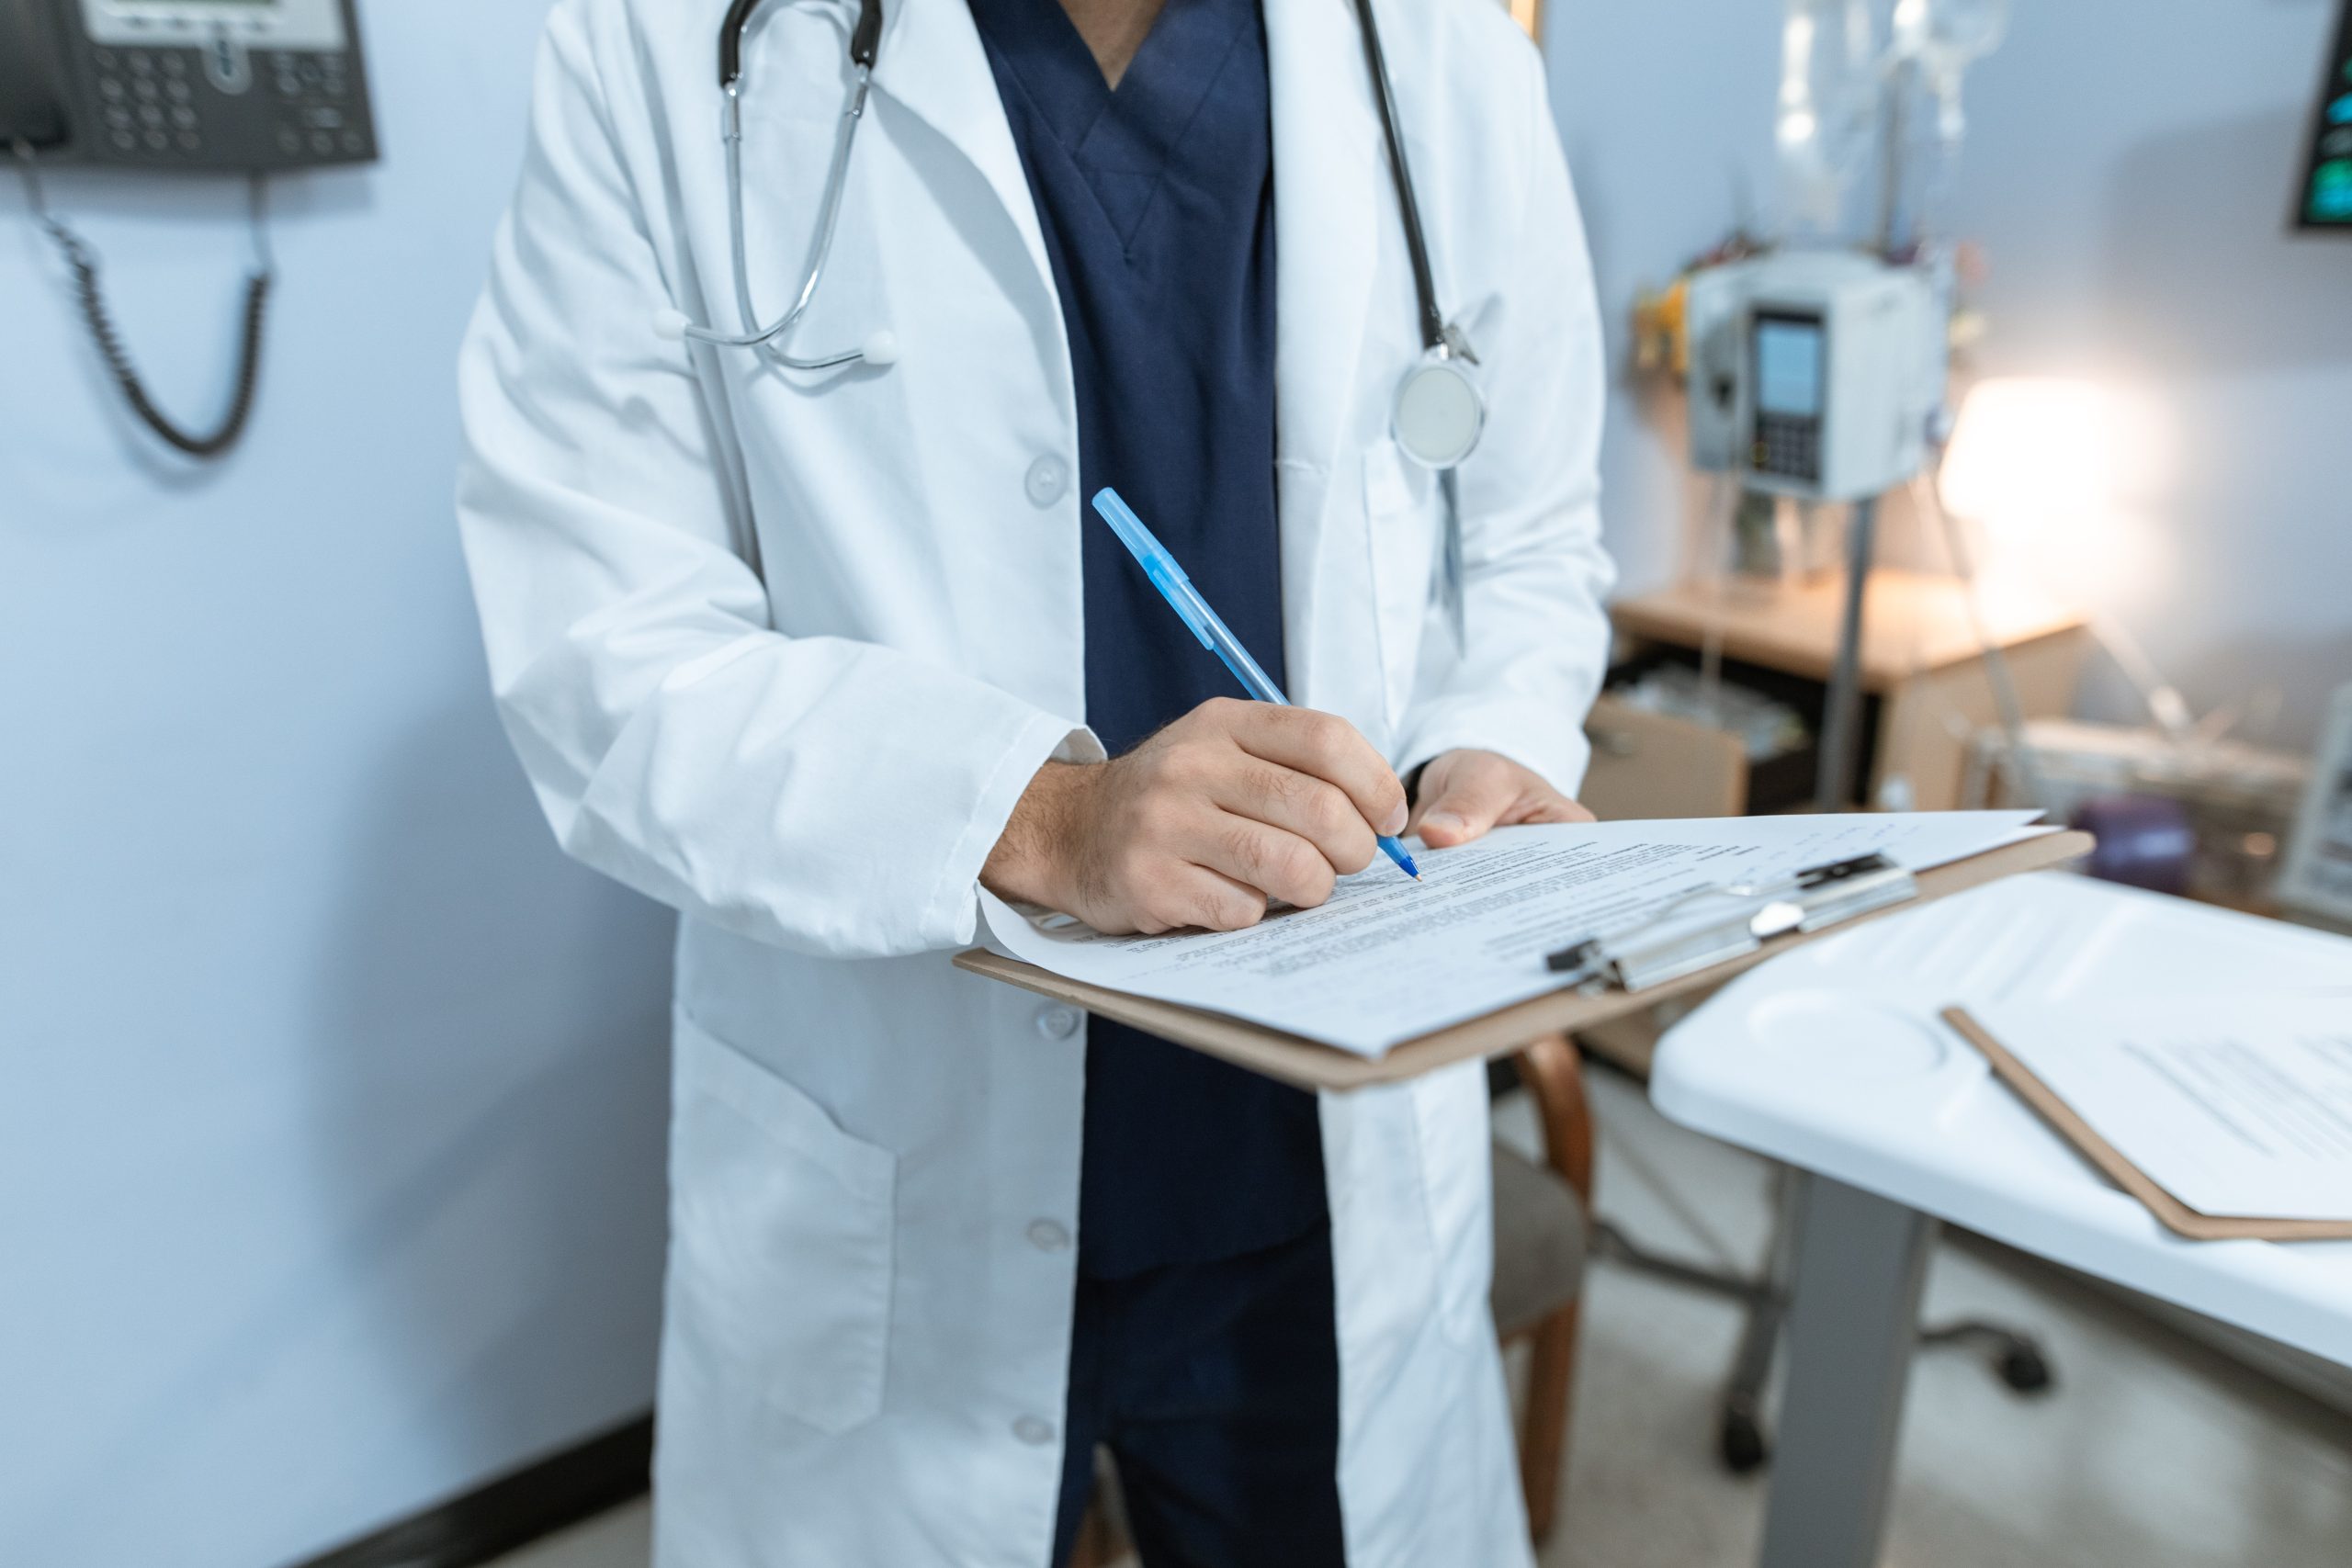 A person in a white doctor coat with a stethoscope around their neck fills out paperwork on a clipboard in a clinic setting.